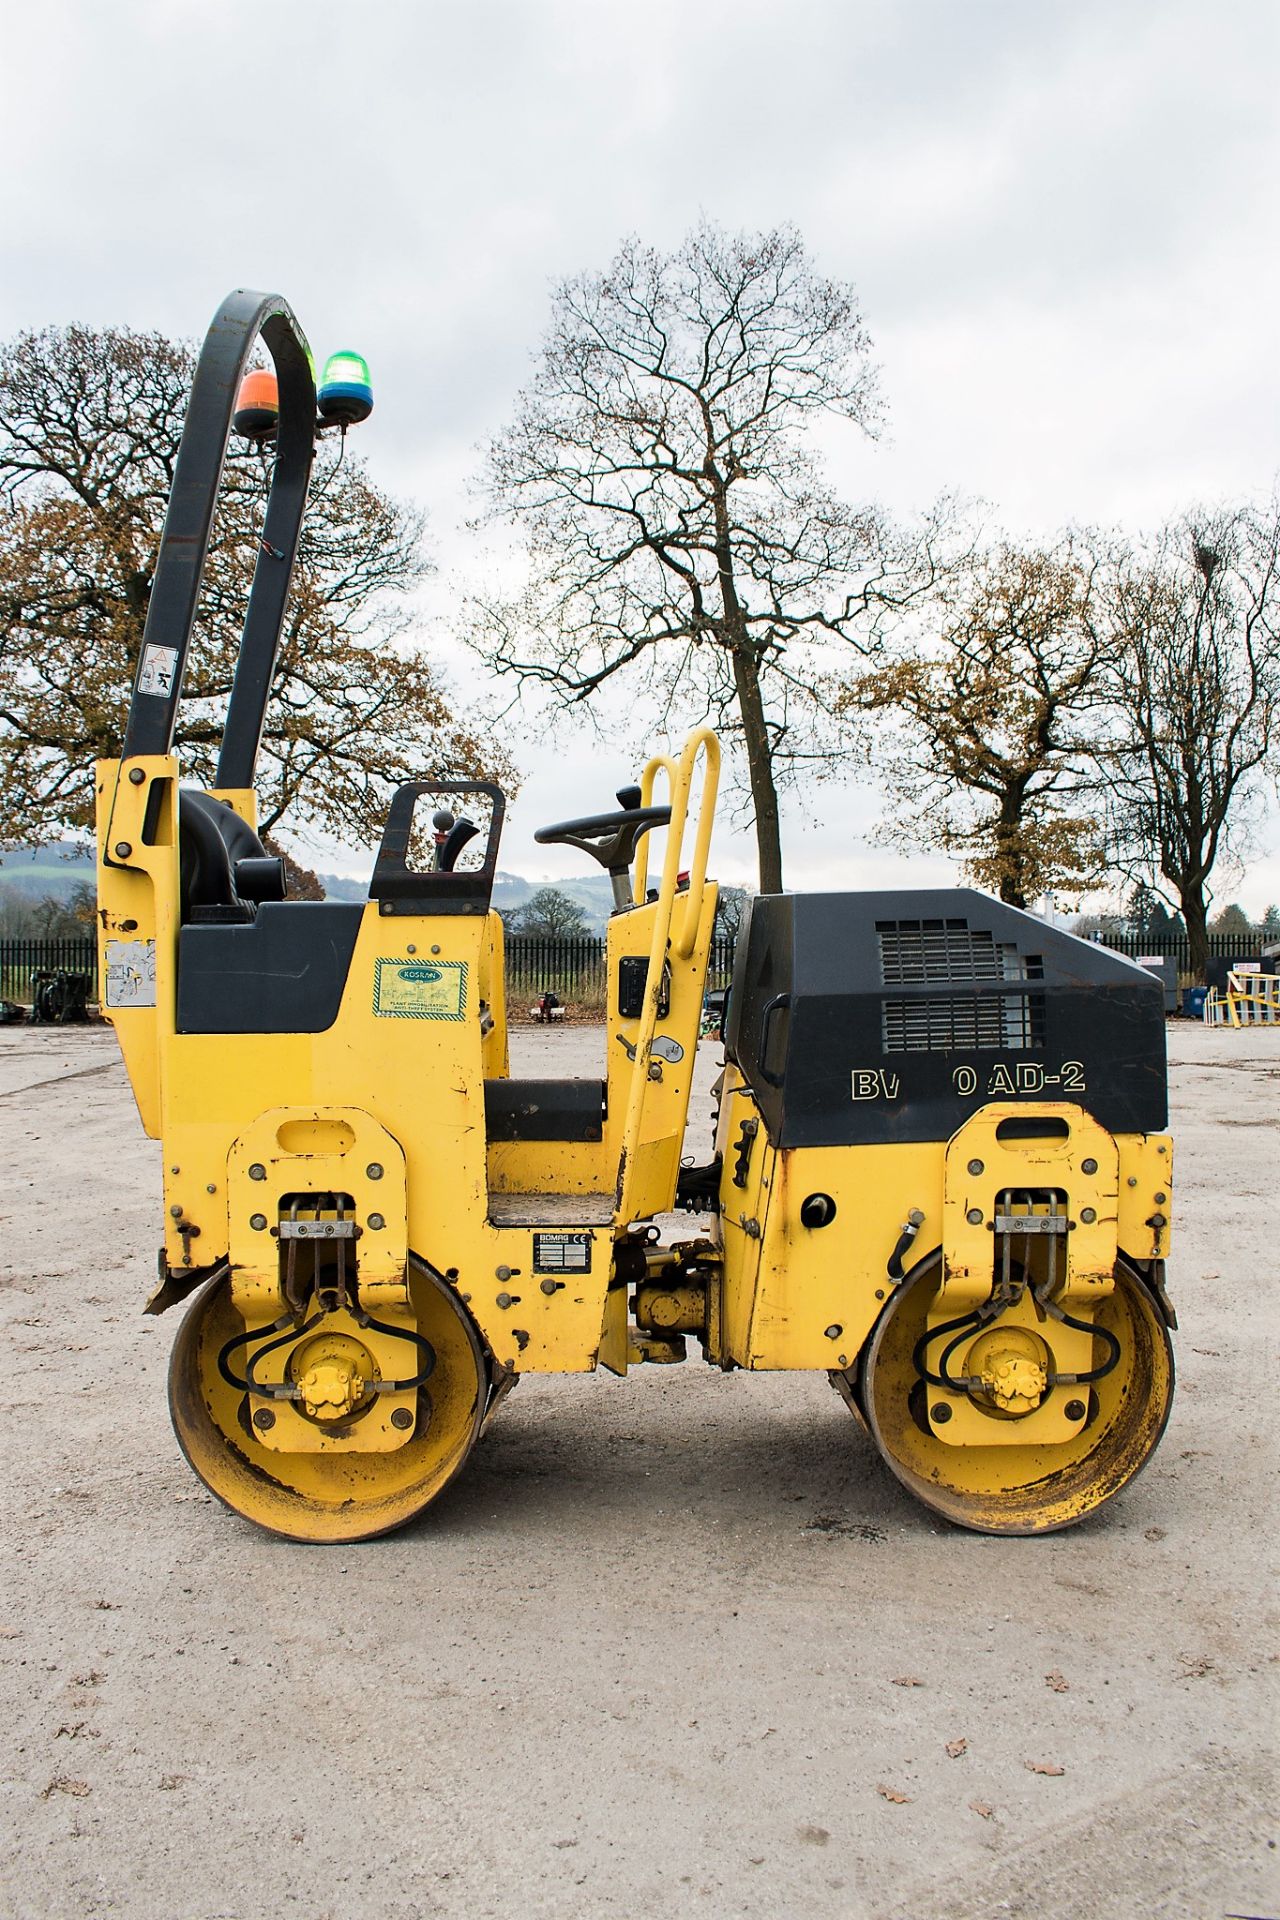 Bomag BW80 AD-2 double drum ride on roller Year: 2006 S/N: 426837 Recorded Hours: 770 R1291 - Image 8 of 13